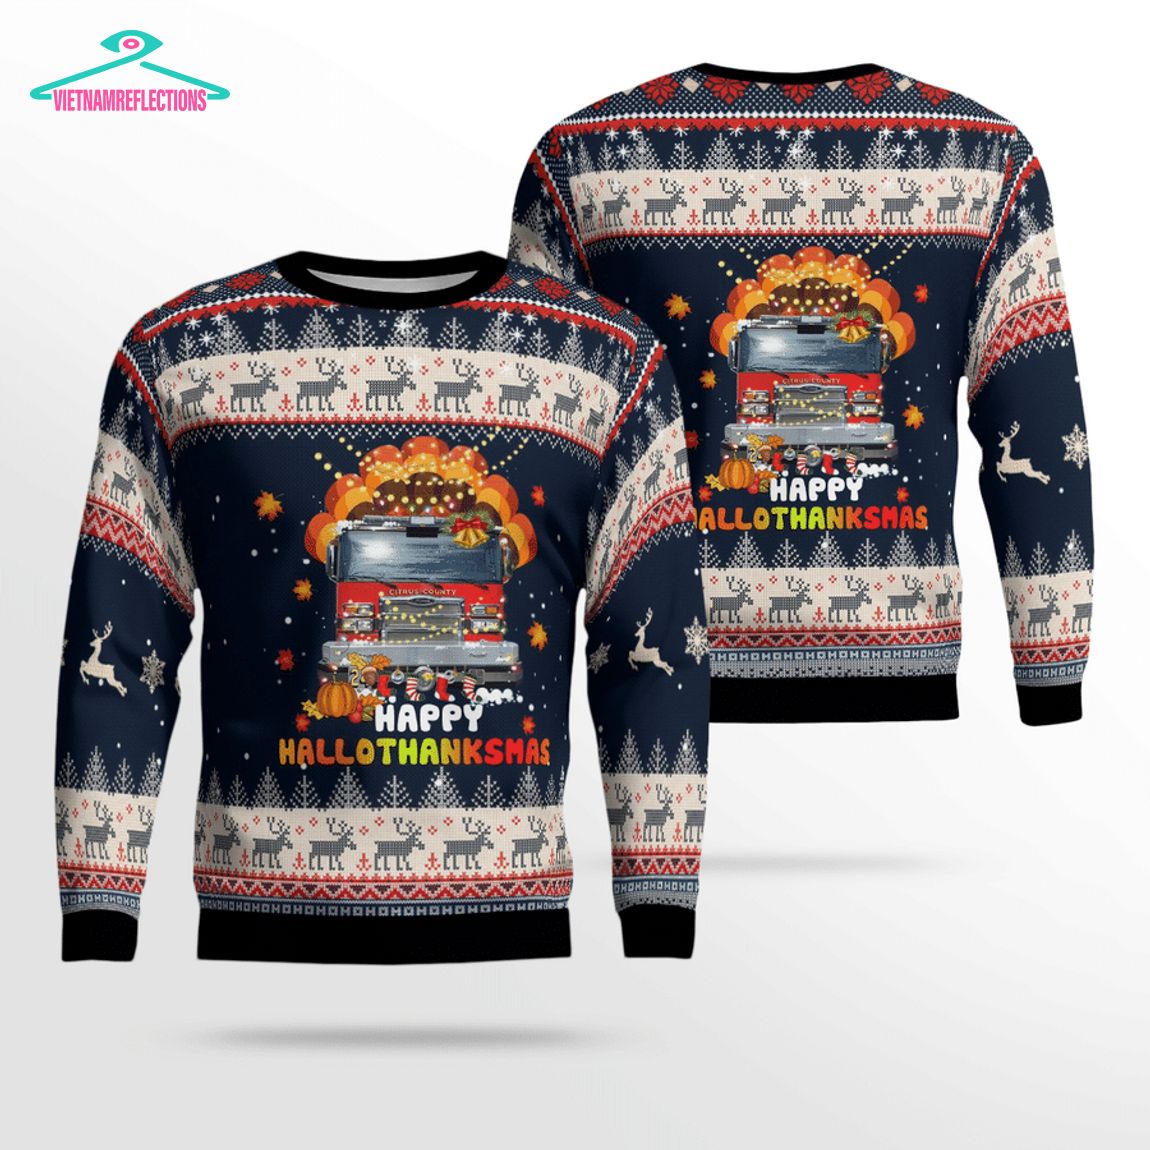 citrus-county-fire-rescue-3d-christmas-sweater-1-hSEw1.jpg